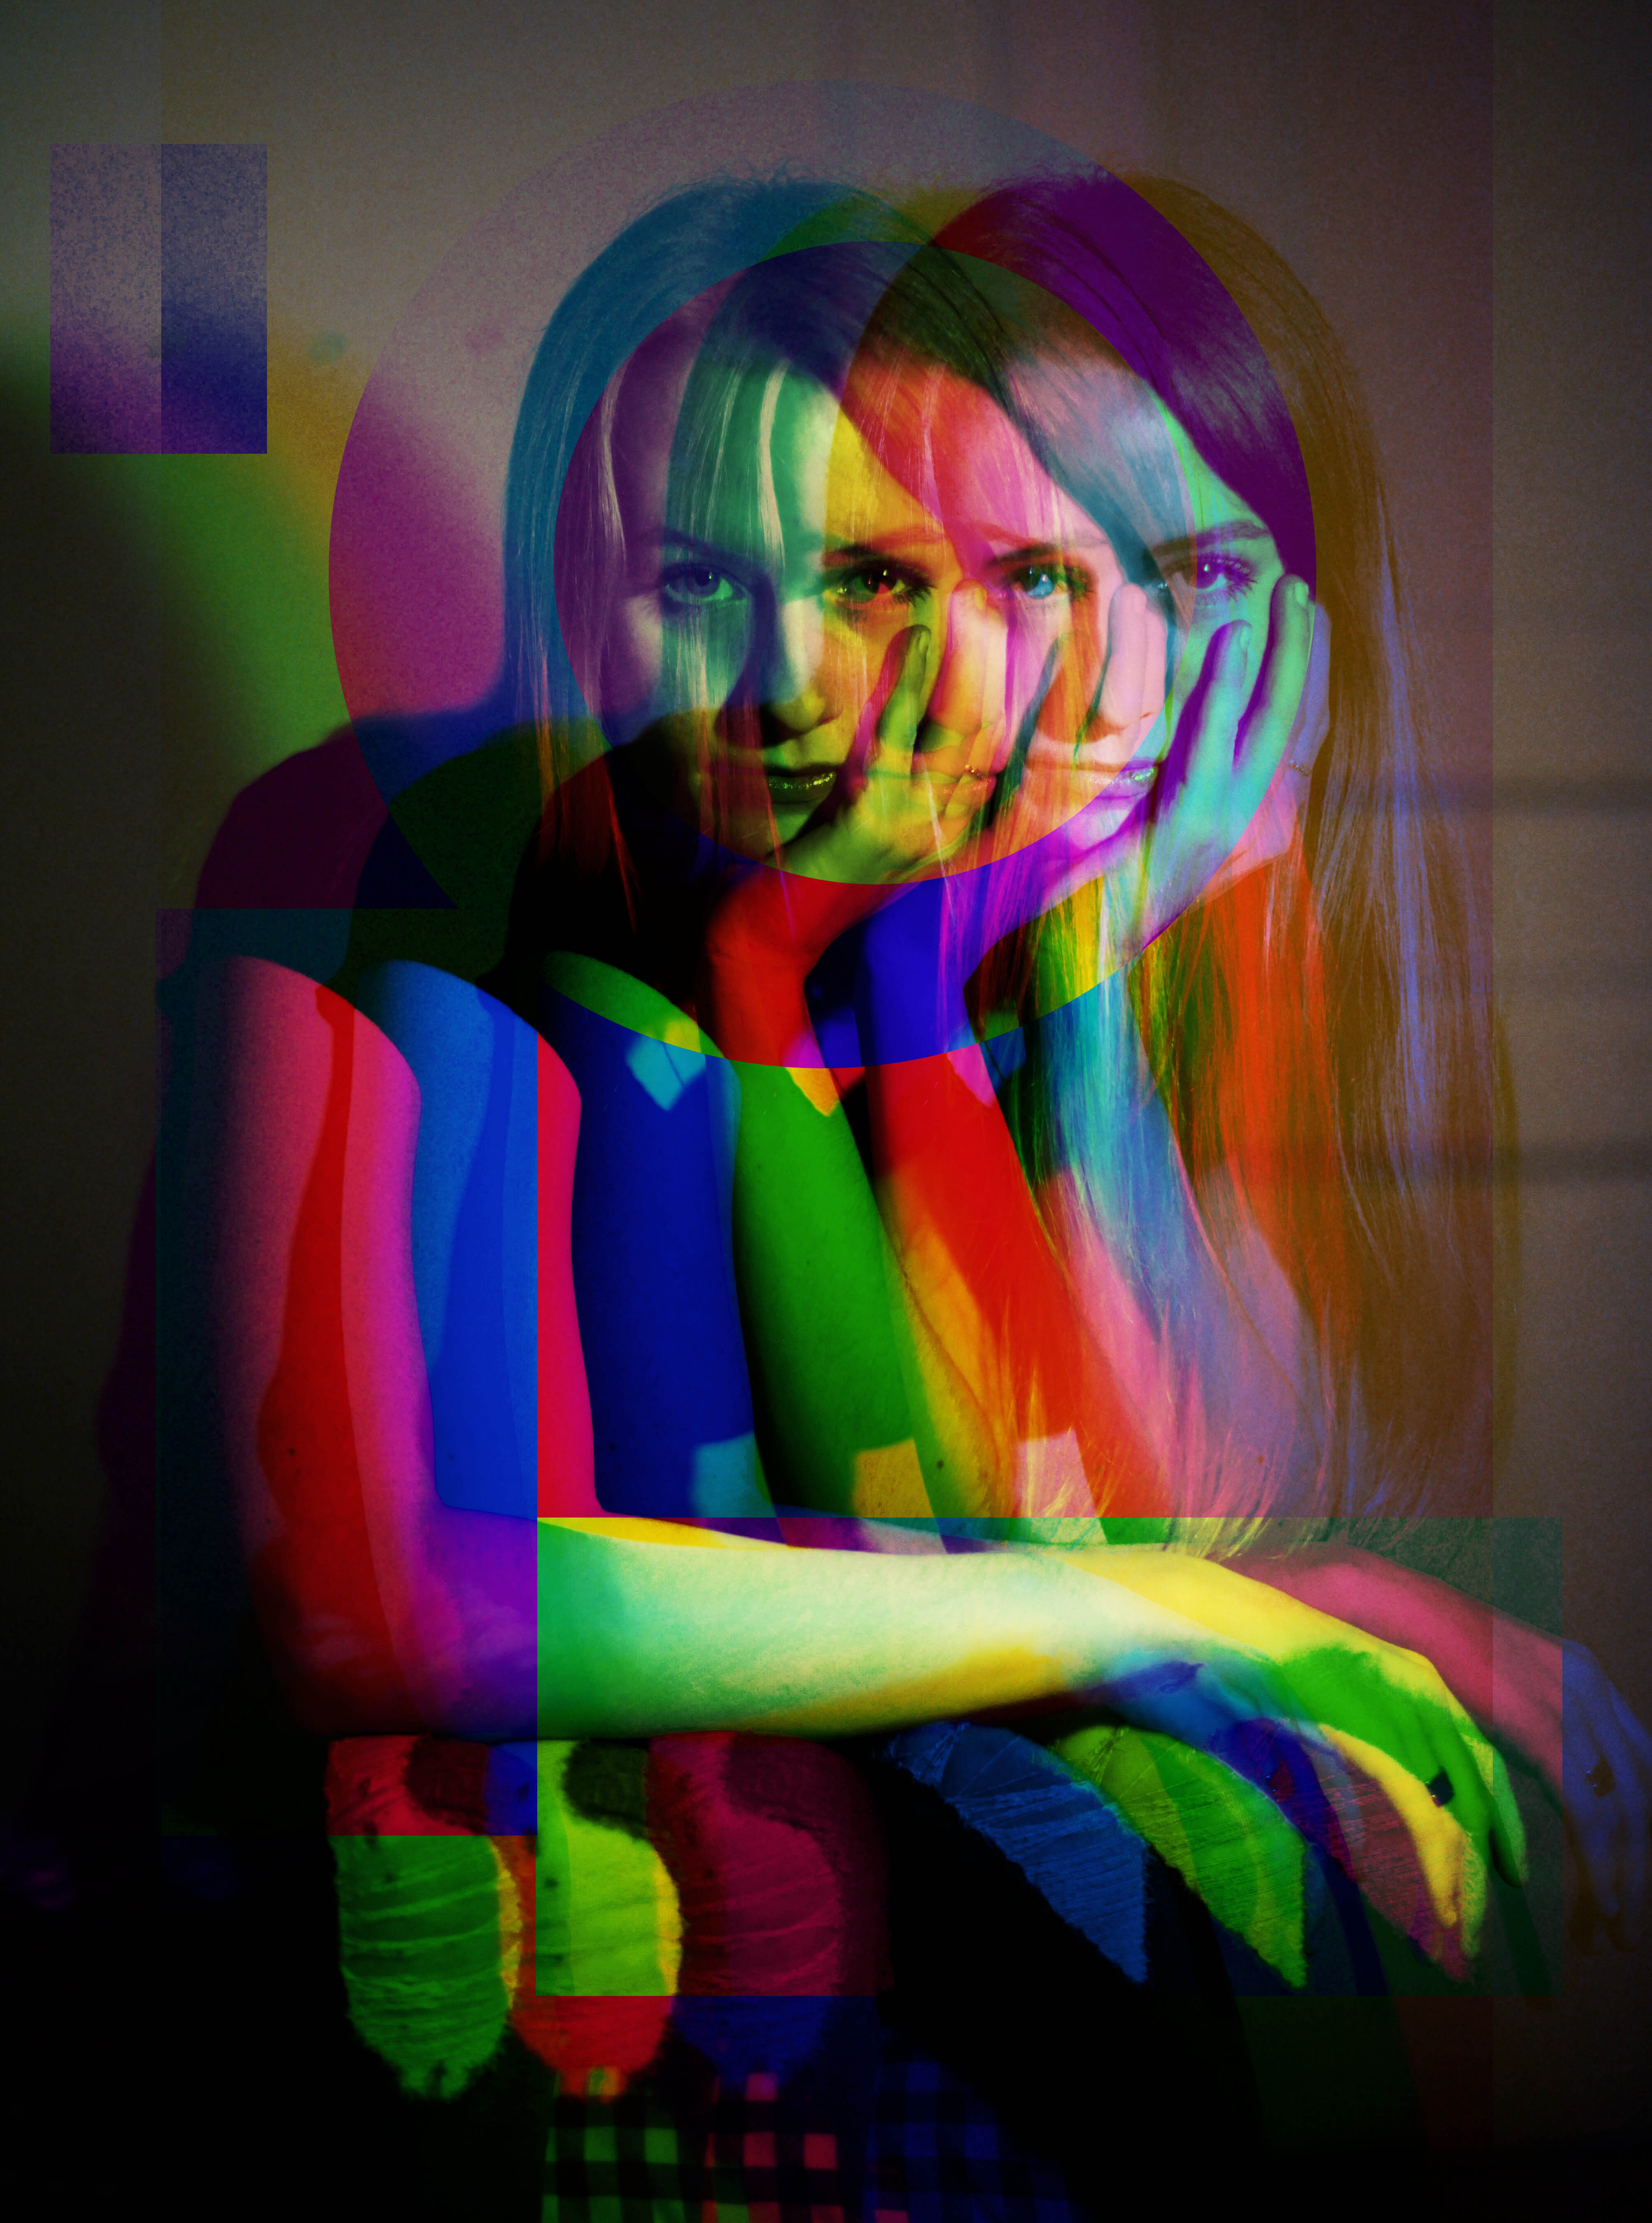 A portrait of a woman seating and staring into the camera. She is duplicated and superimposed over herself in different transparent colors. 